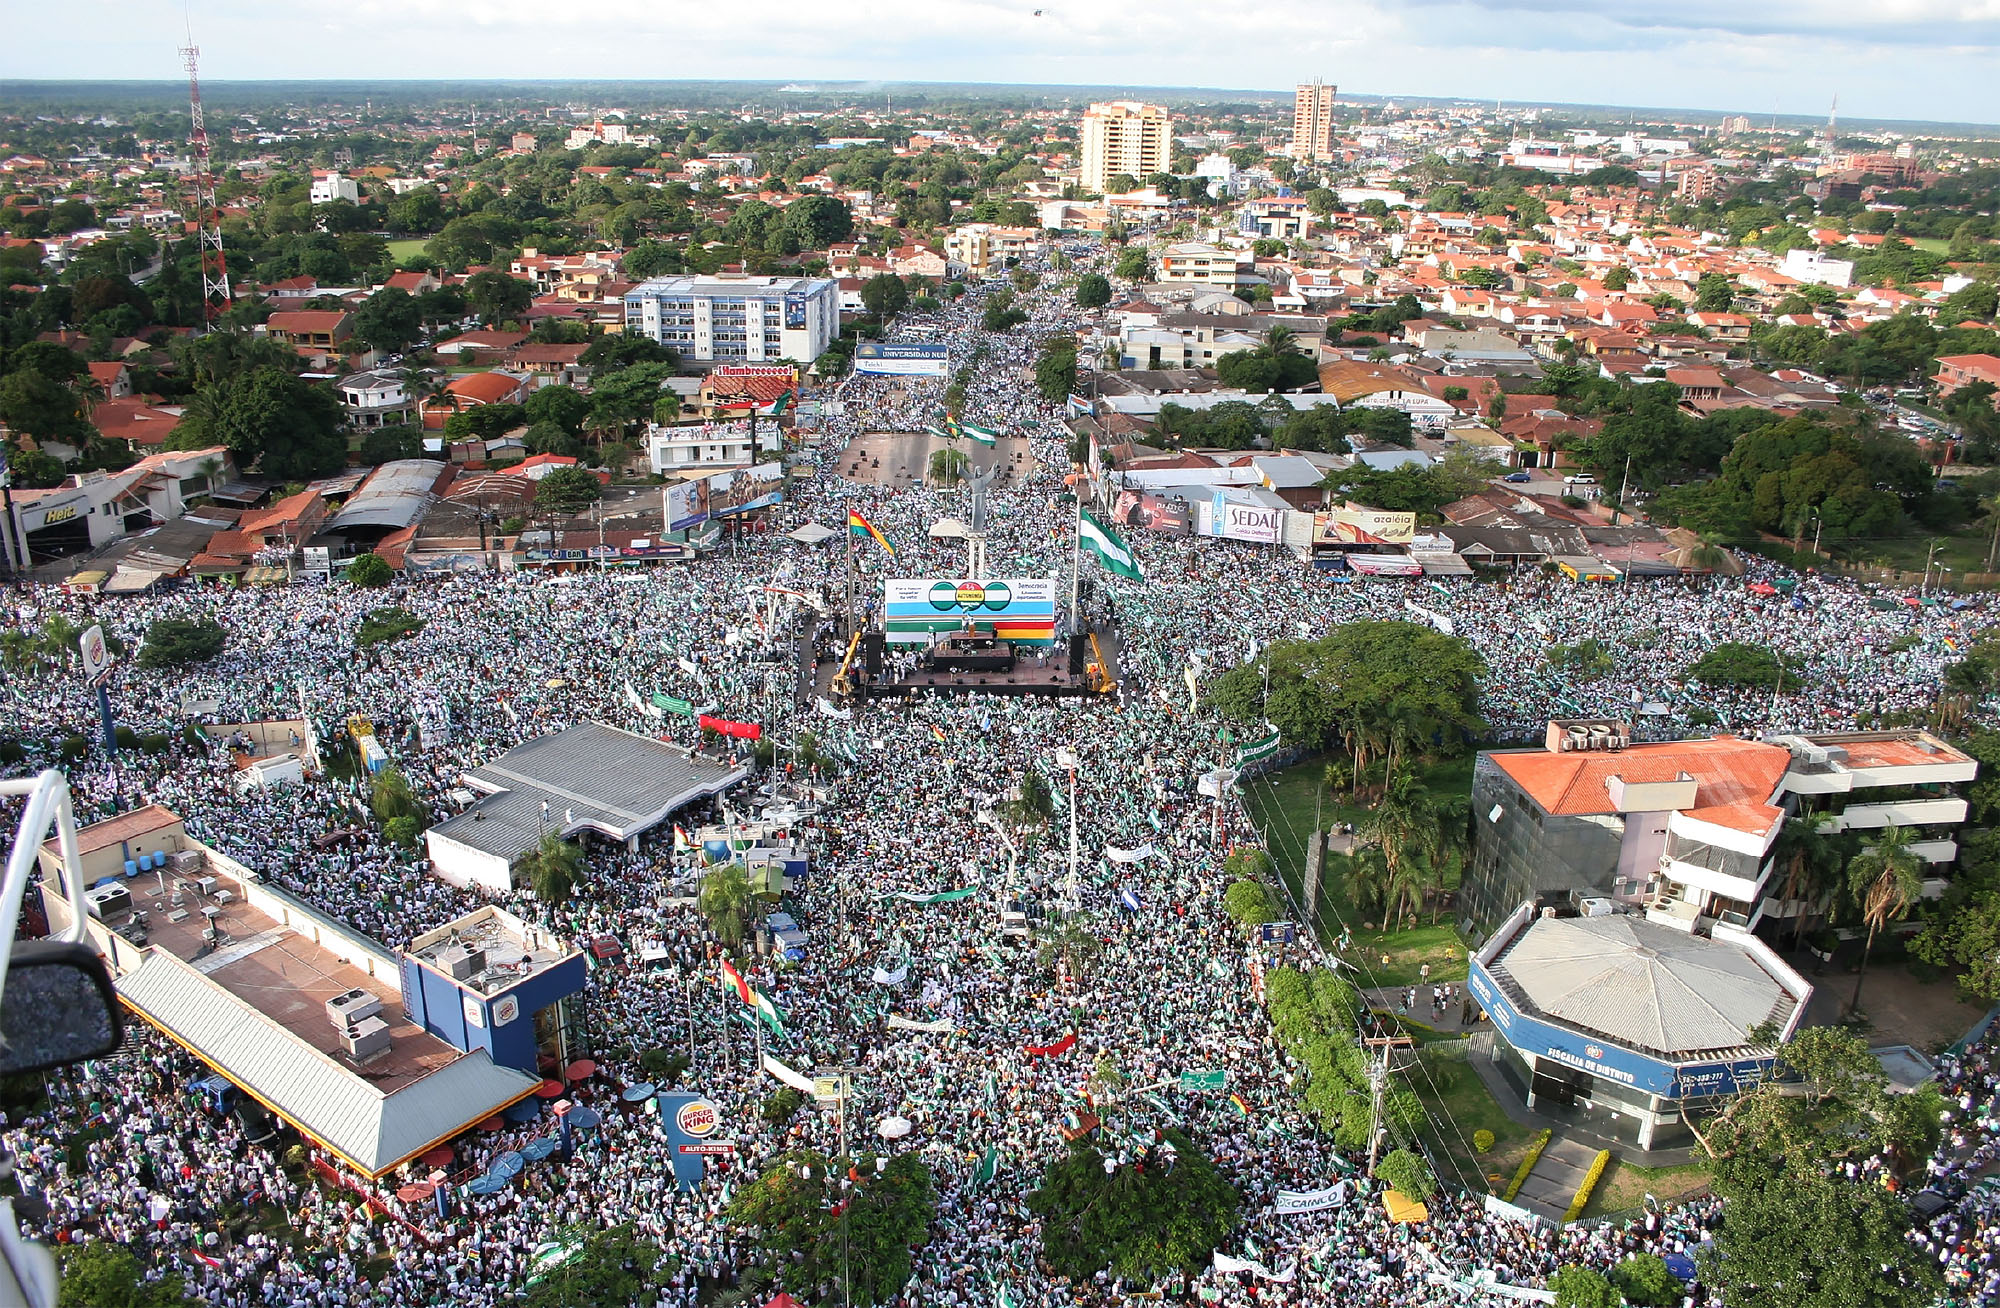 An aerial view of a huge crowd of people in plaza in Santa Cruz, Bolivia, as part of the 2006 “Cabildo del Millión” demonstration supporting autonomy for Santa Cruz within Bolivia. (Photo courtesy of the Comité Pro Santa Cruz.)